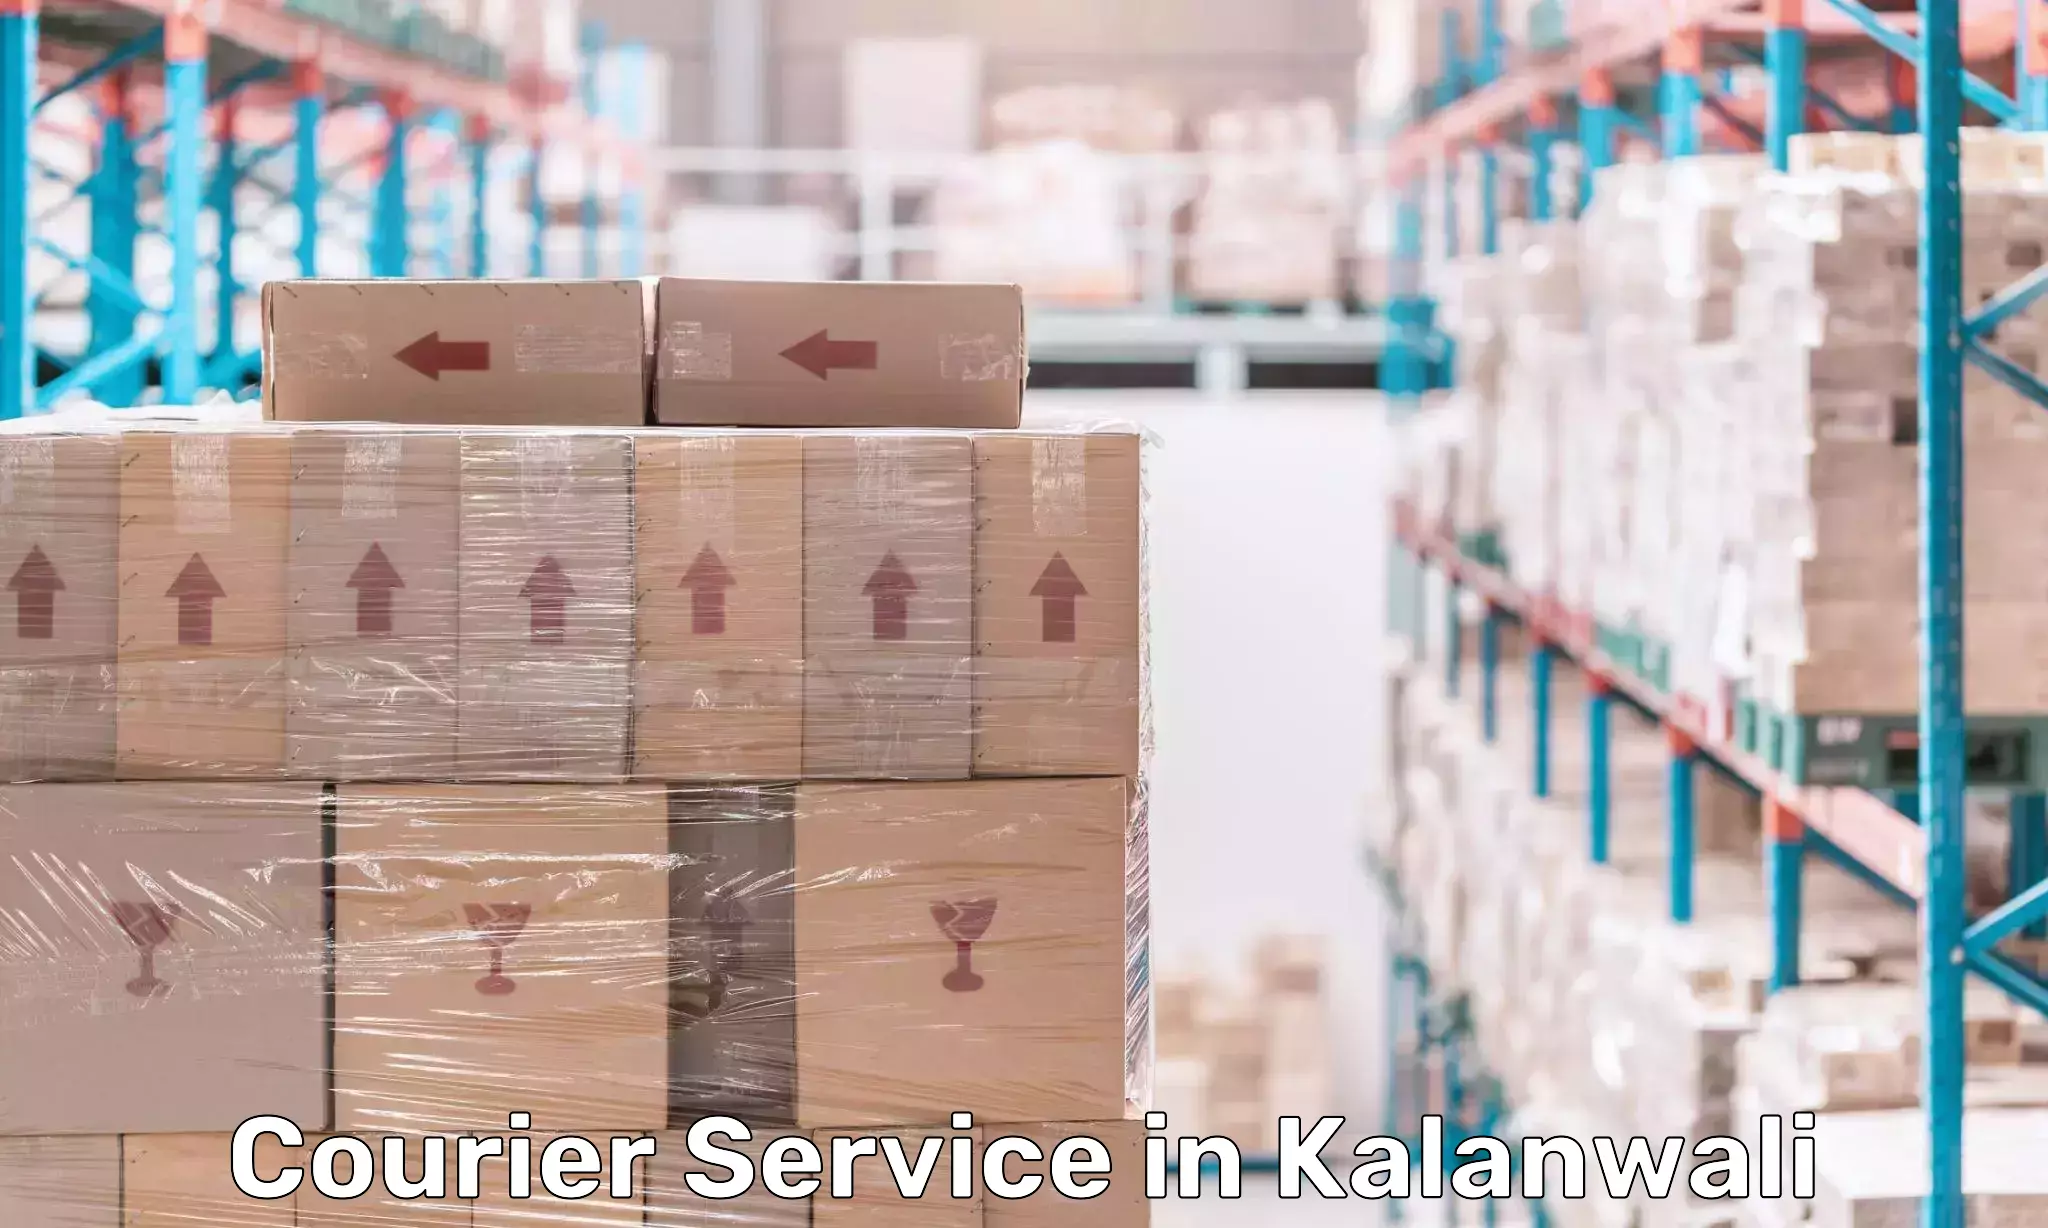 Customer-oriented courier services in Kalanwali